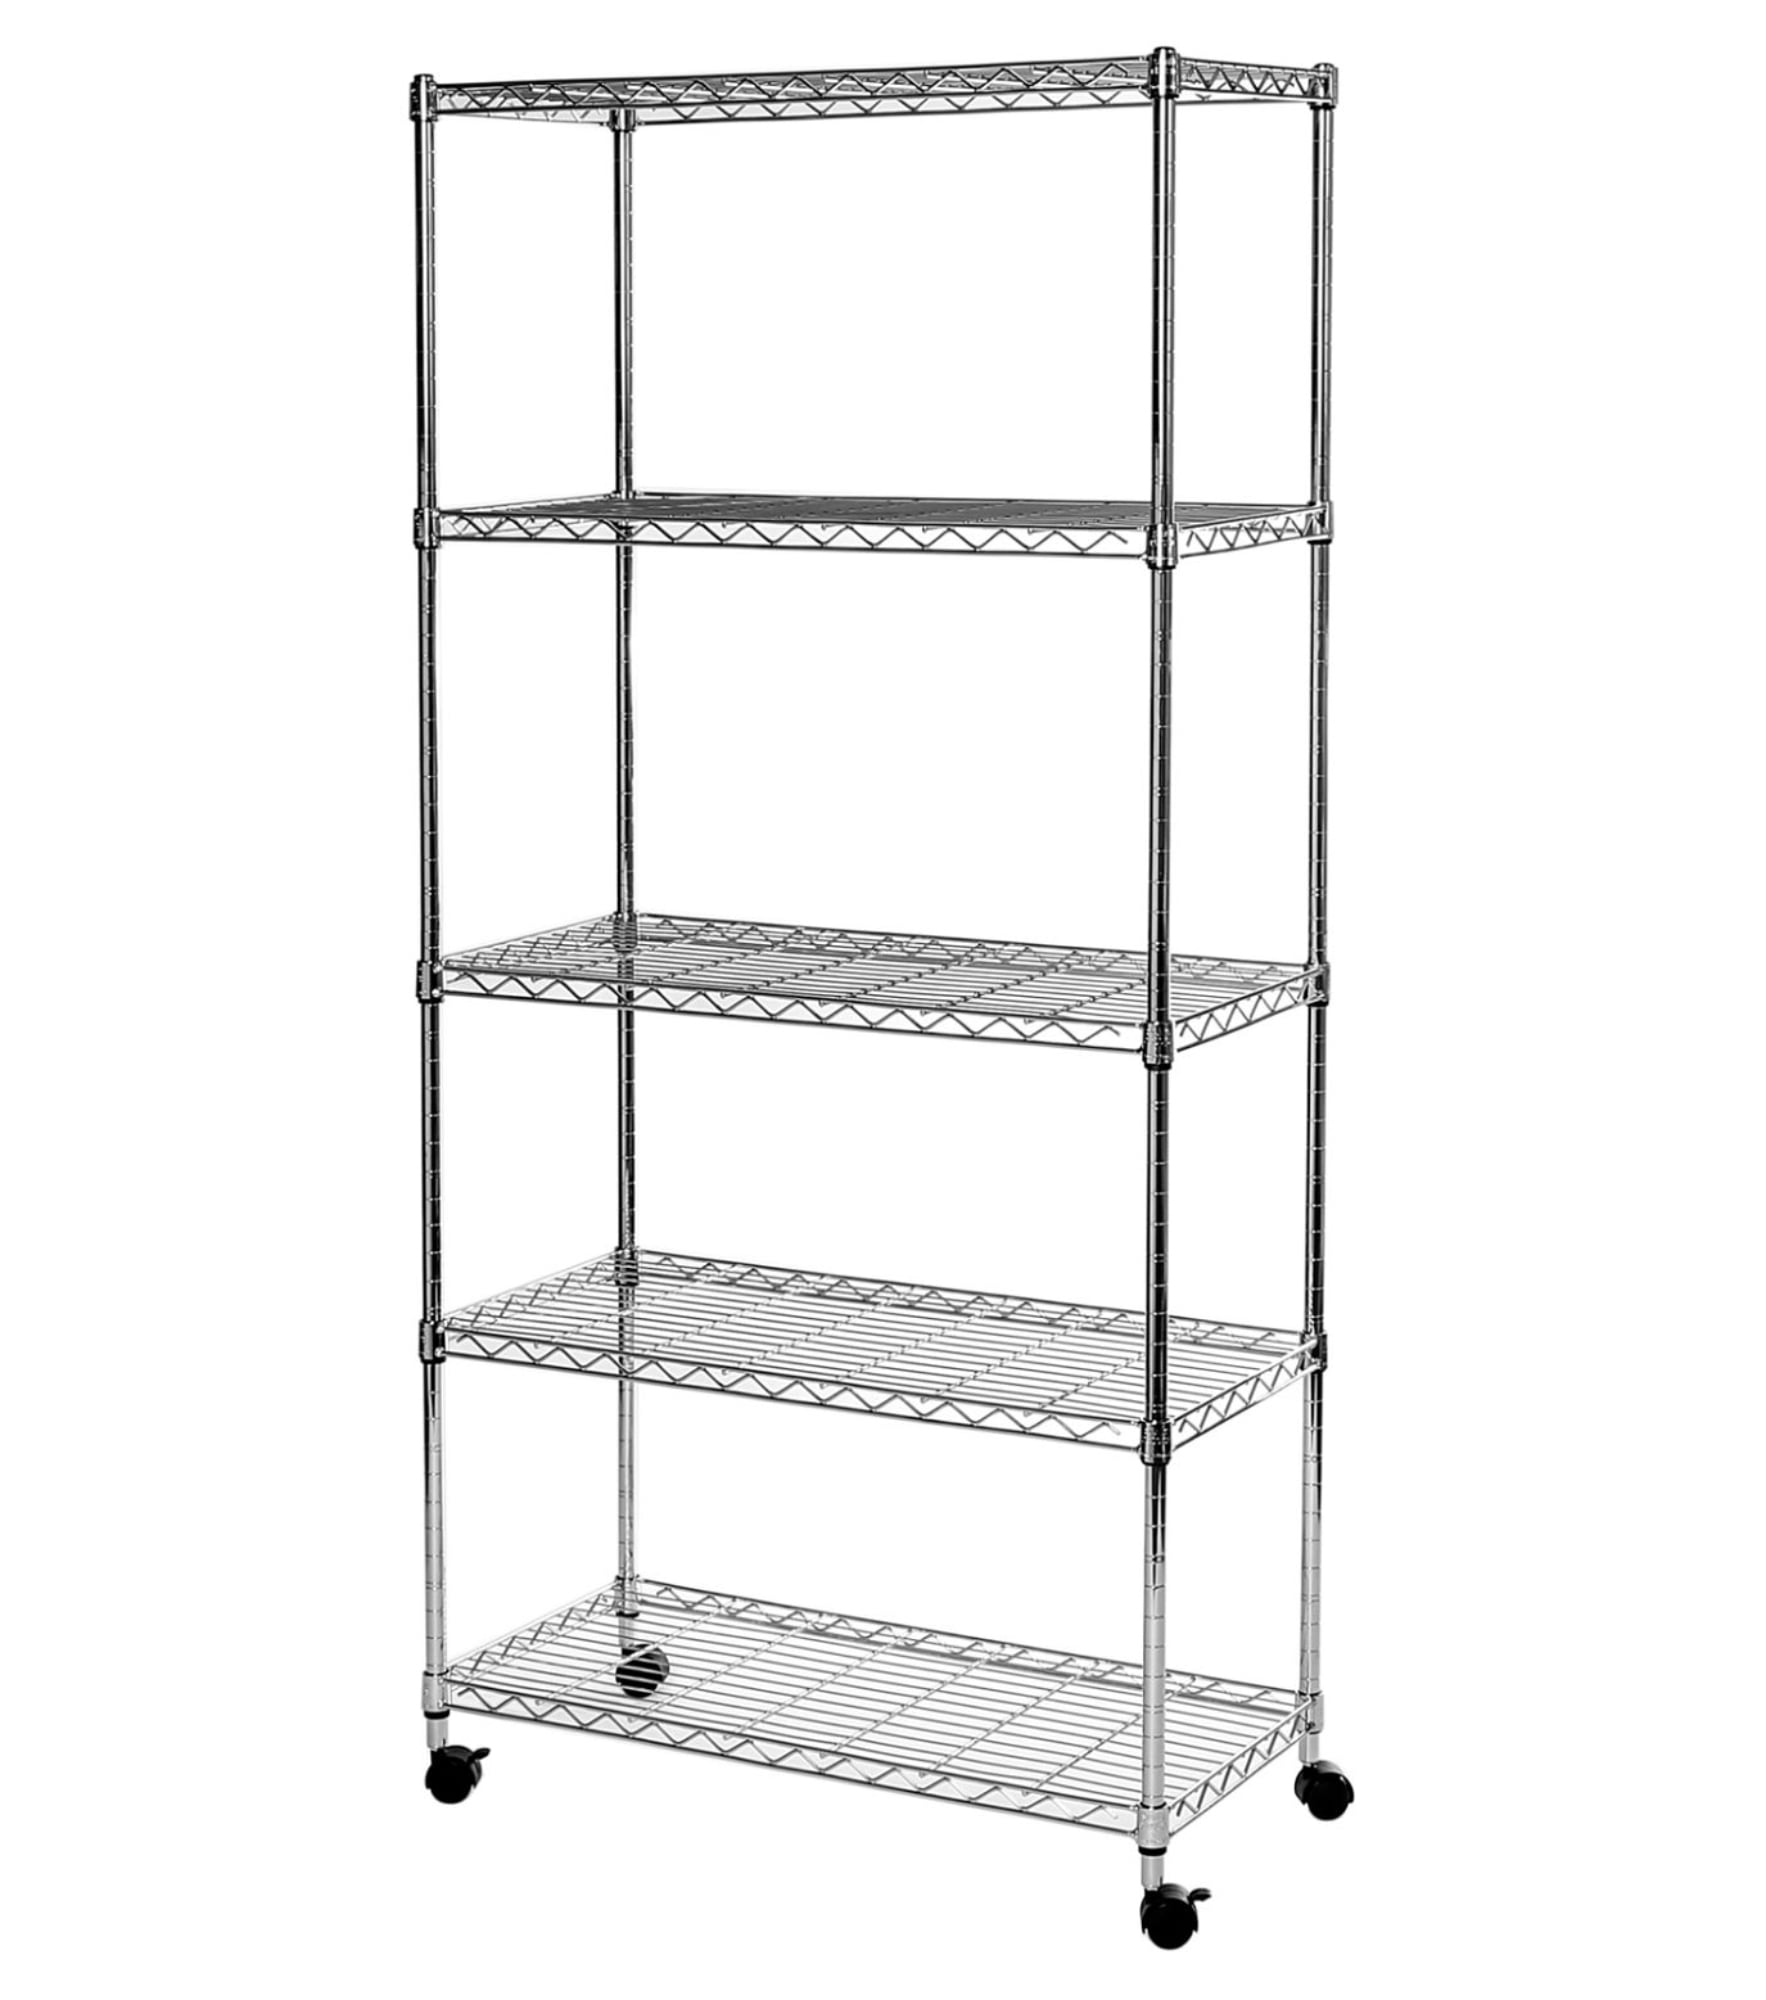 60 H 5 Tier Steel Wire Shelving System, Seville Chrome Wire Shelving